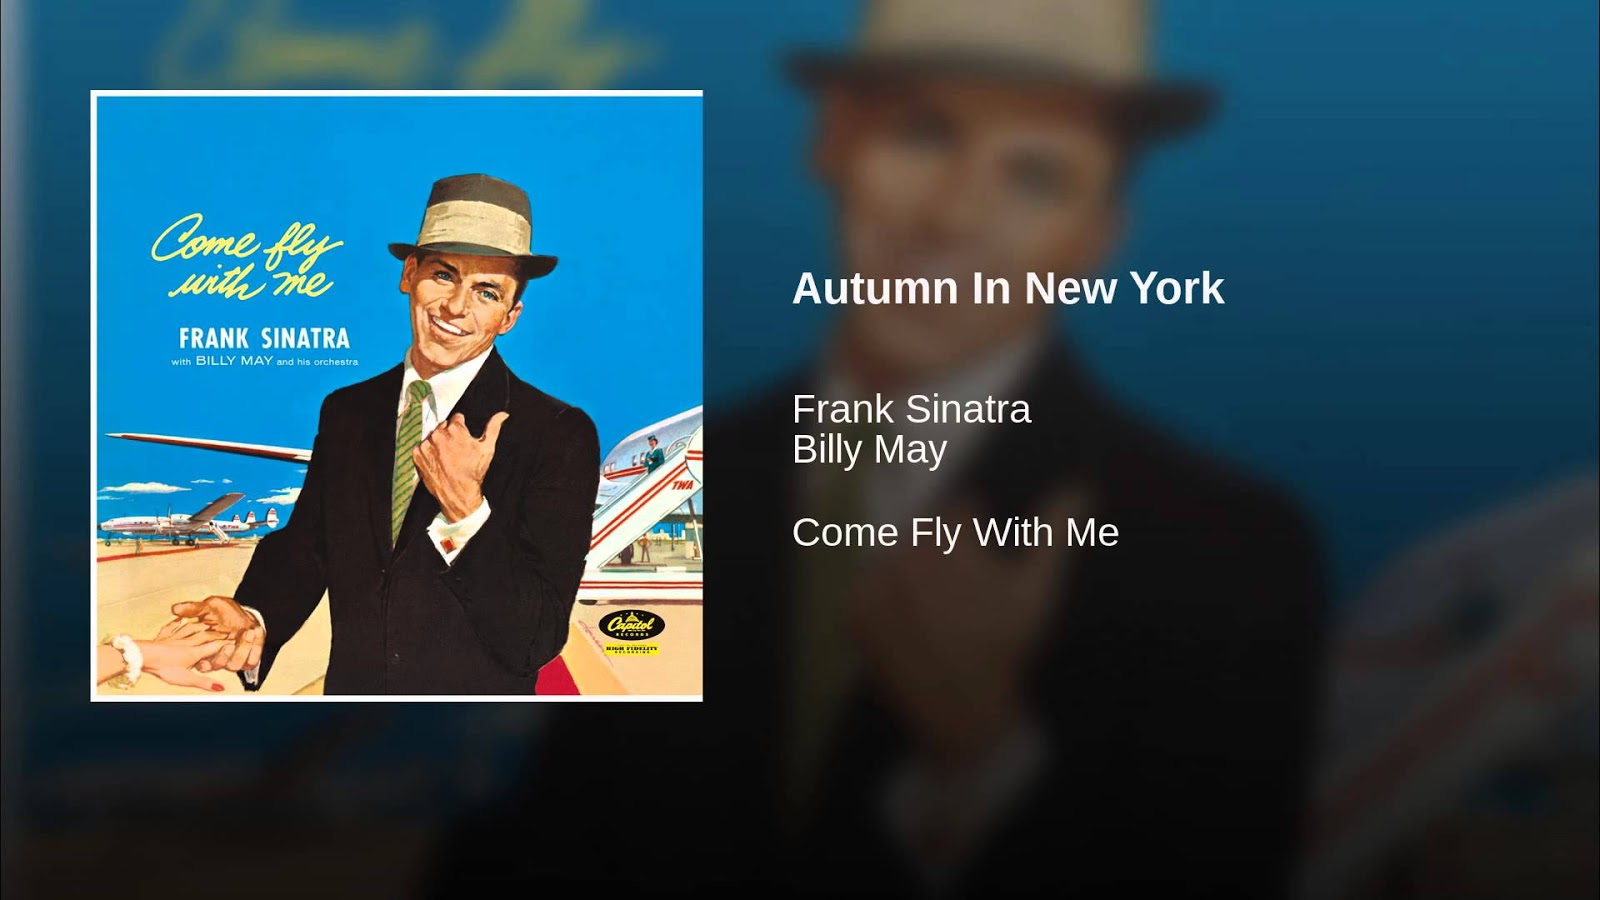 Come Fly with me Фрэнк Синатра. April in Paris Frank Sinatra. New York New York Frank Sinatra. Come Fly with me Frank Sinatra обложка.